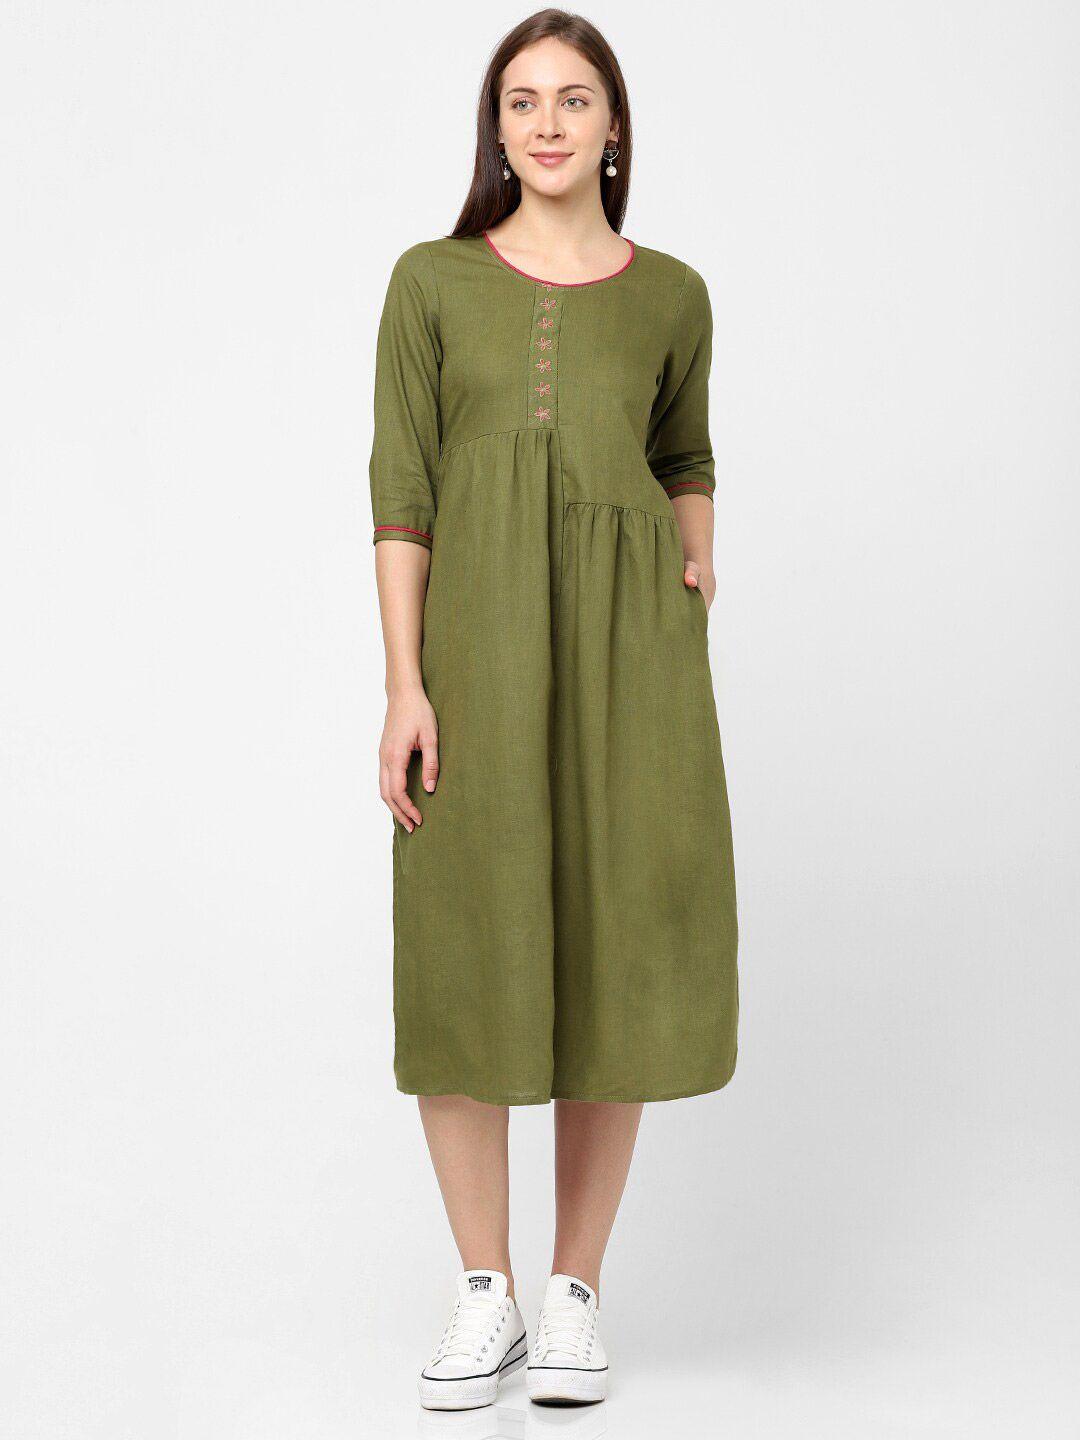 indifusion-green-floral-embroidered-linen-midi-dress